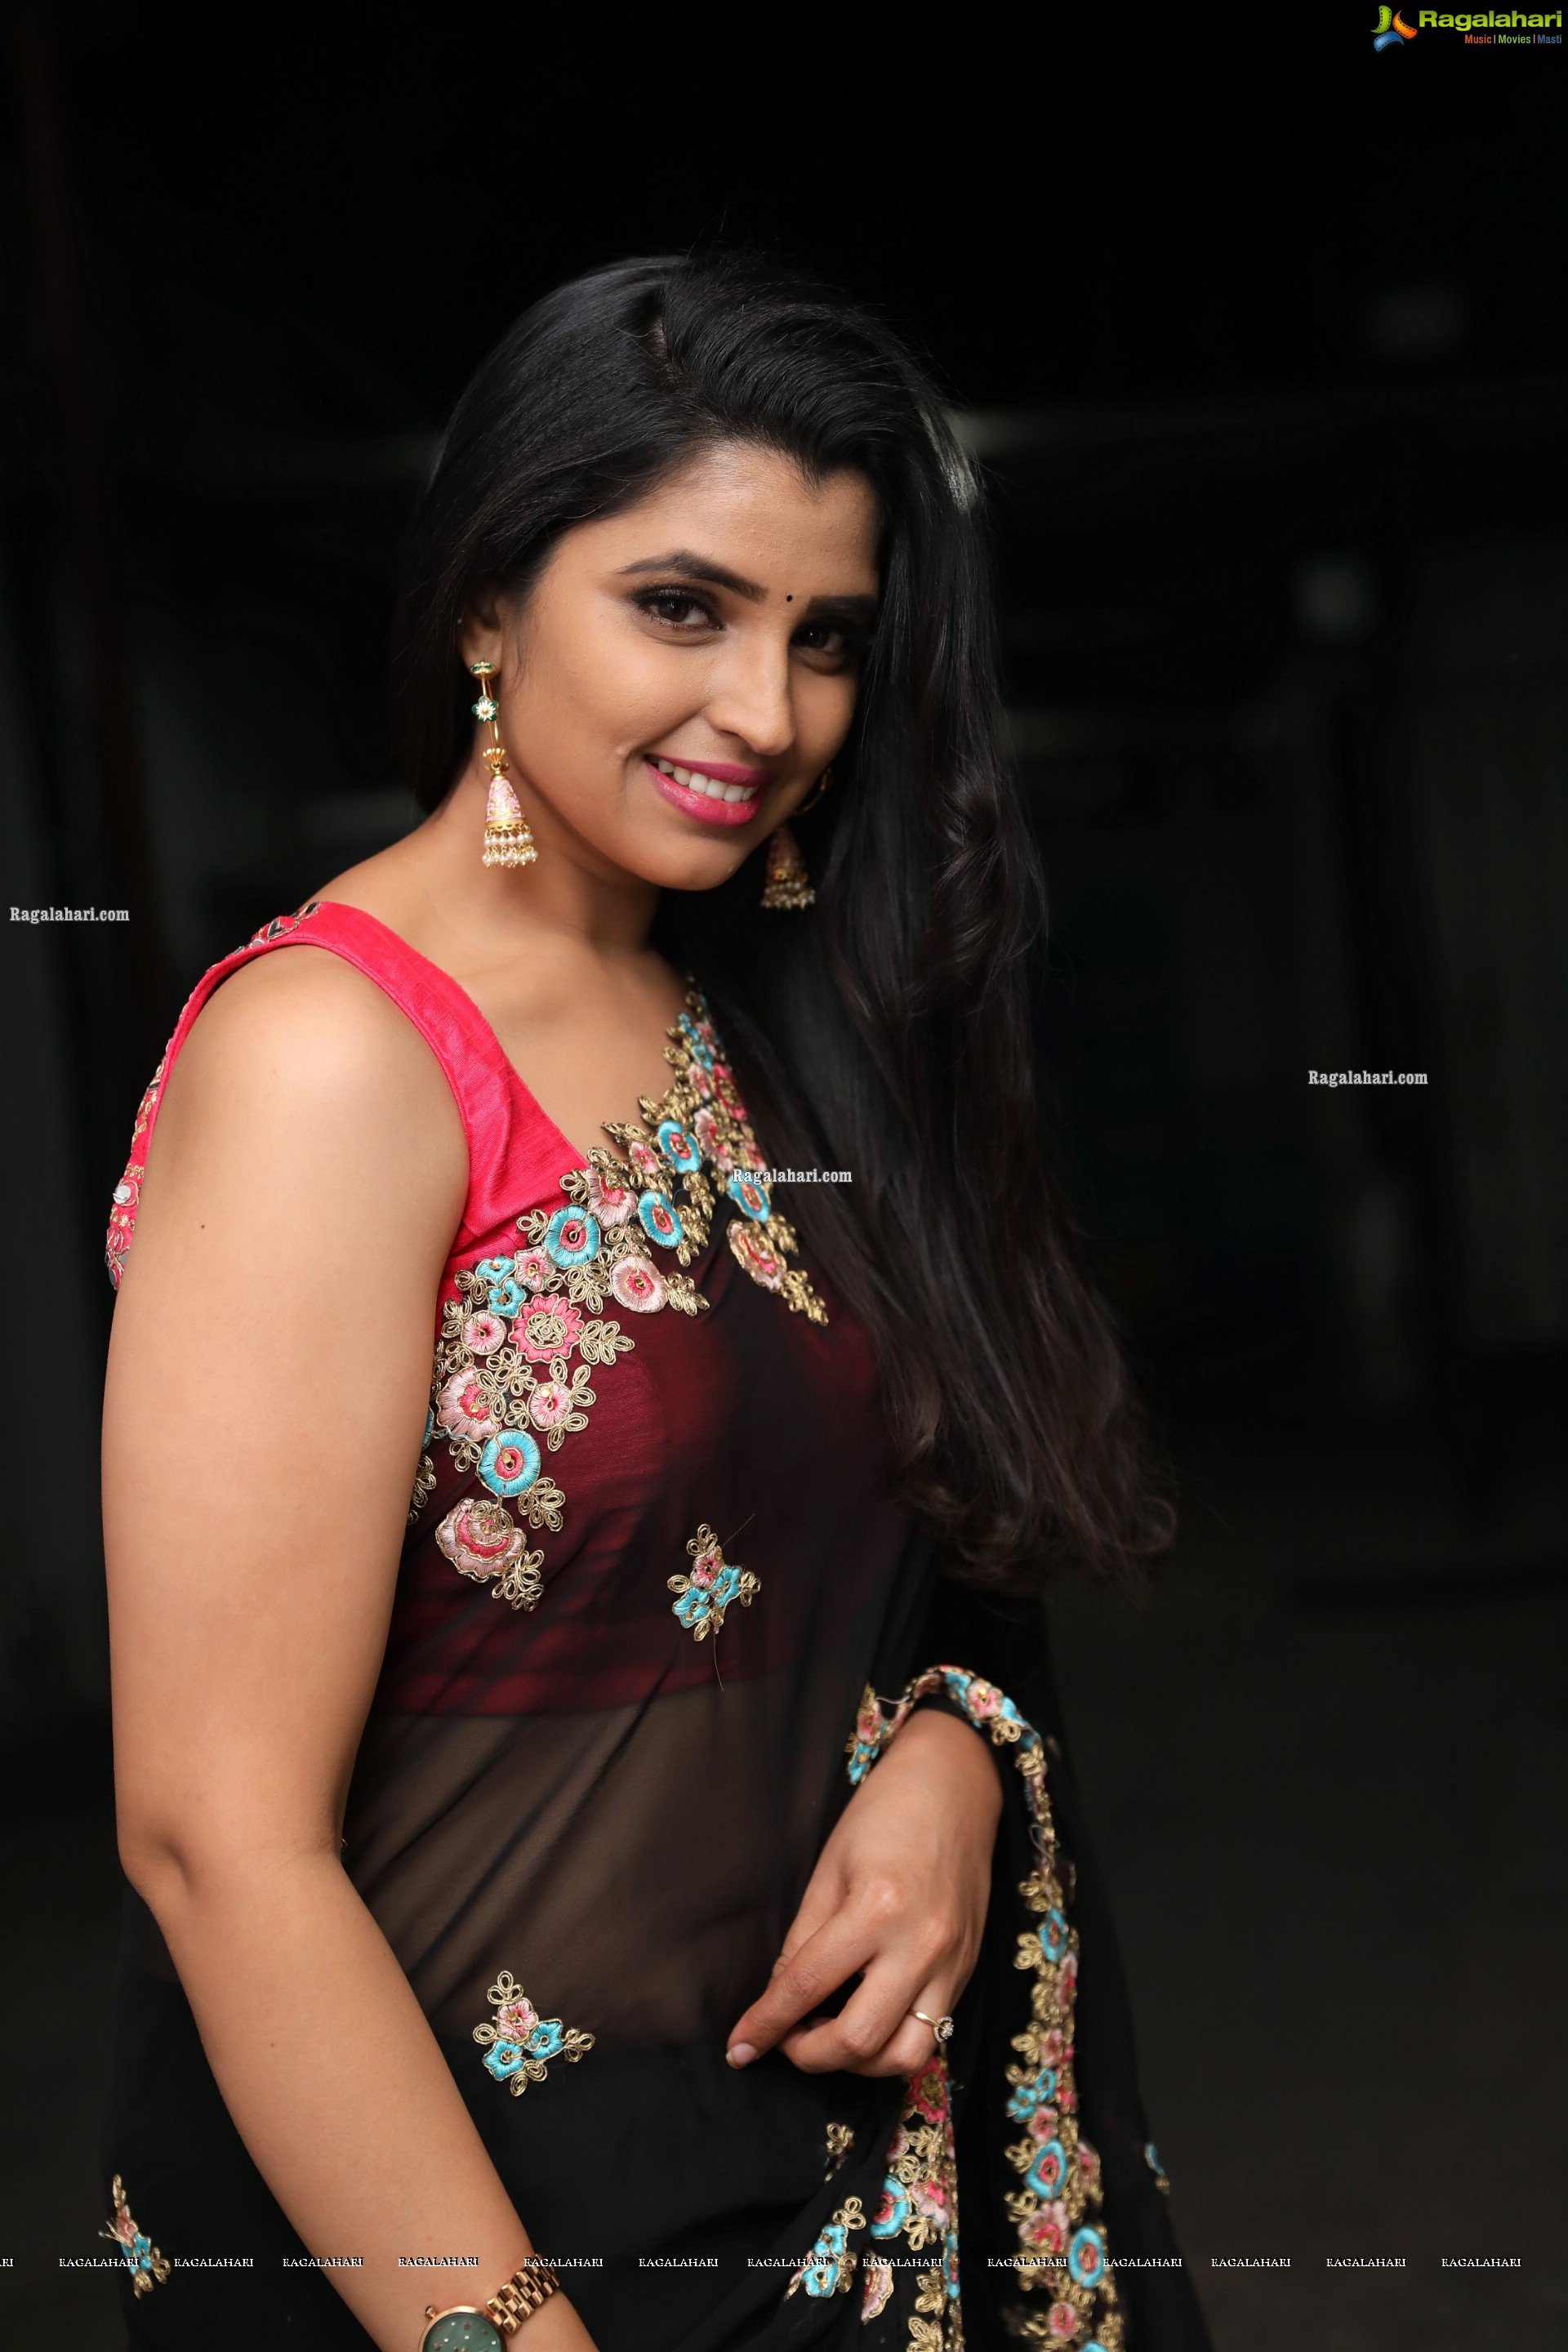 Anchor Shyamala in Black Georgette Saree in Floral Embroidery, HD Photo Gallery